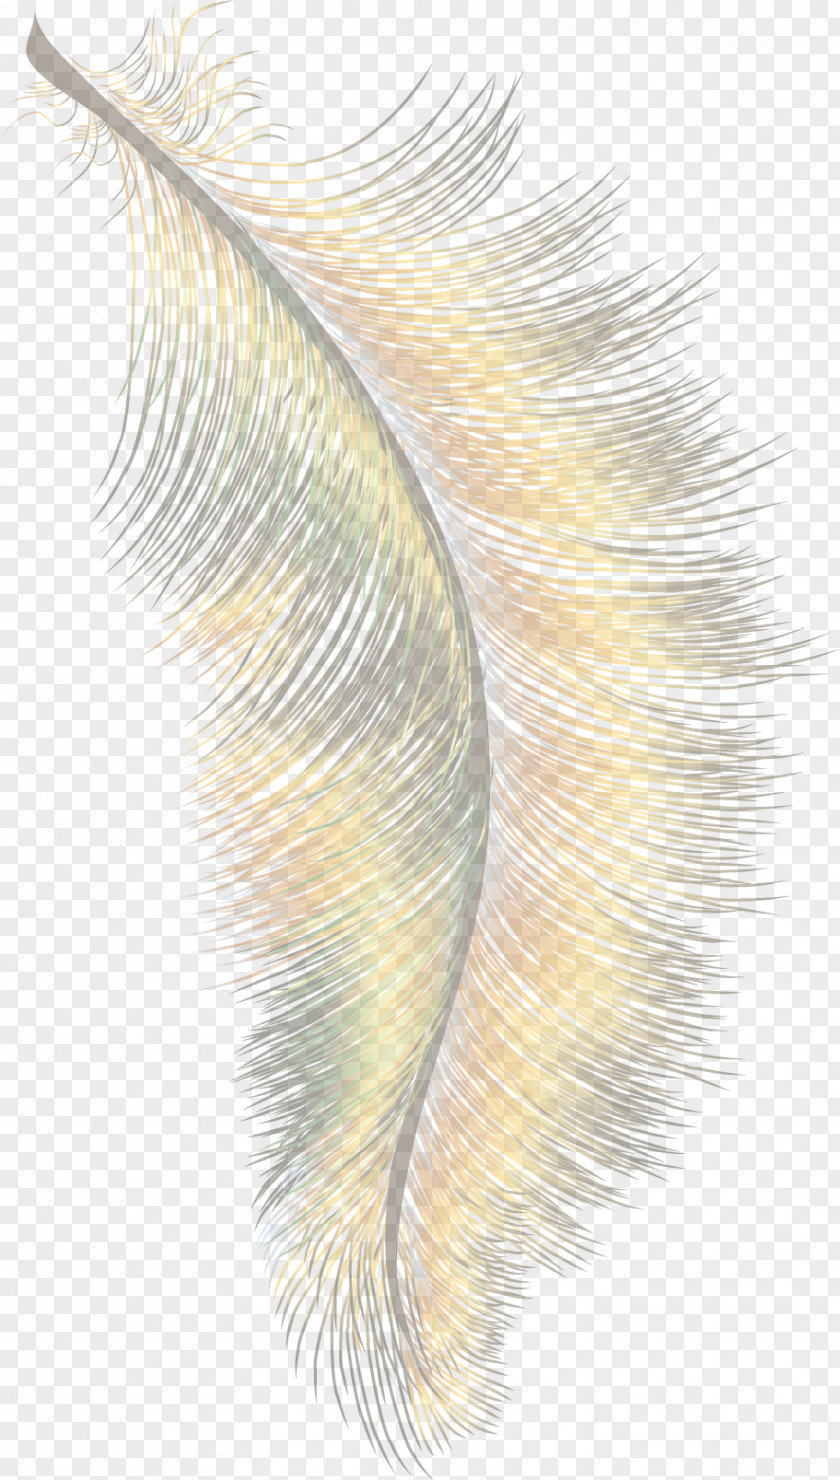 Feather Material Cartoon Wing PNG